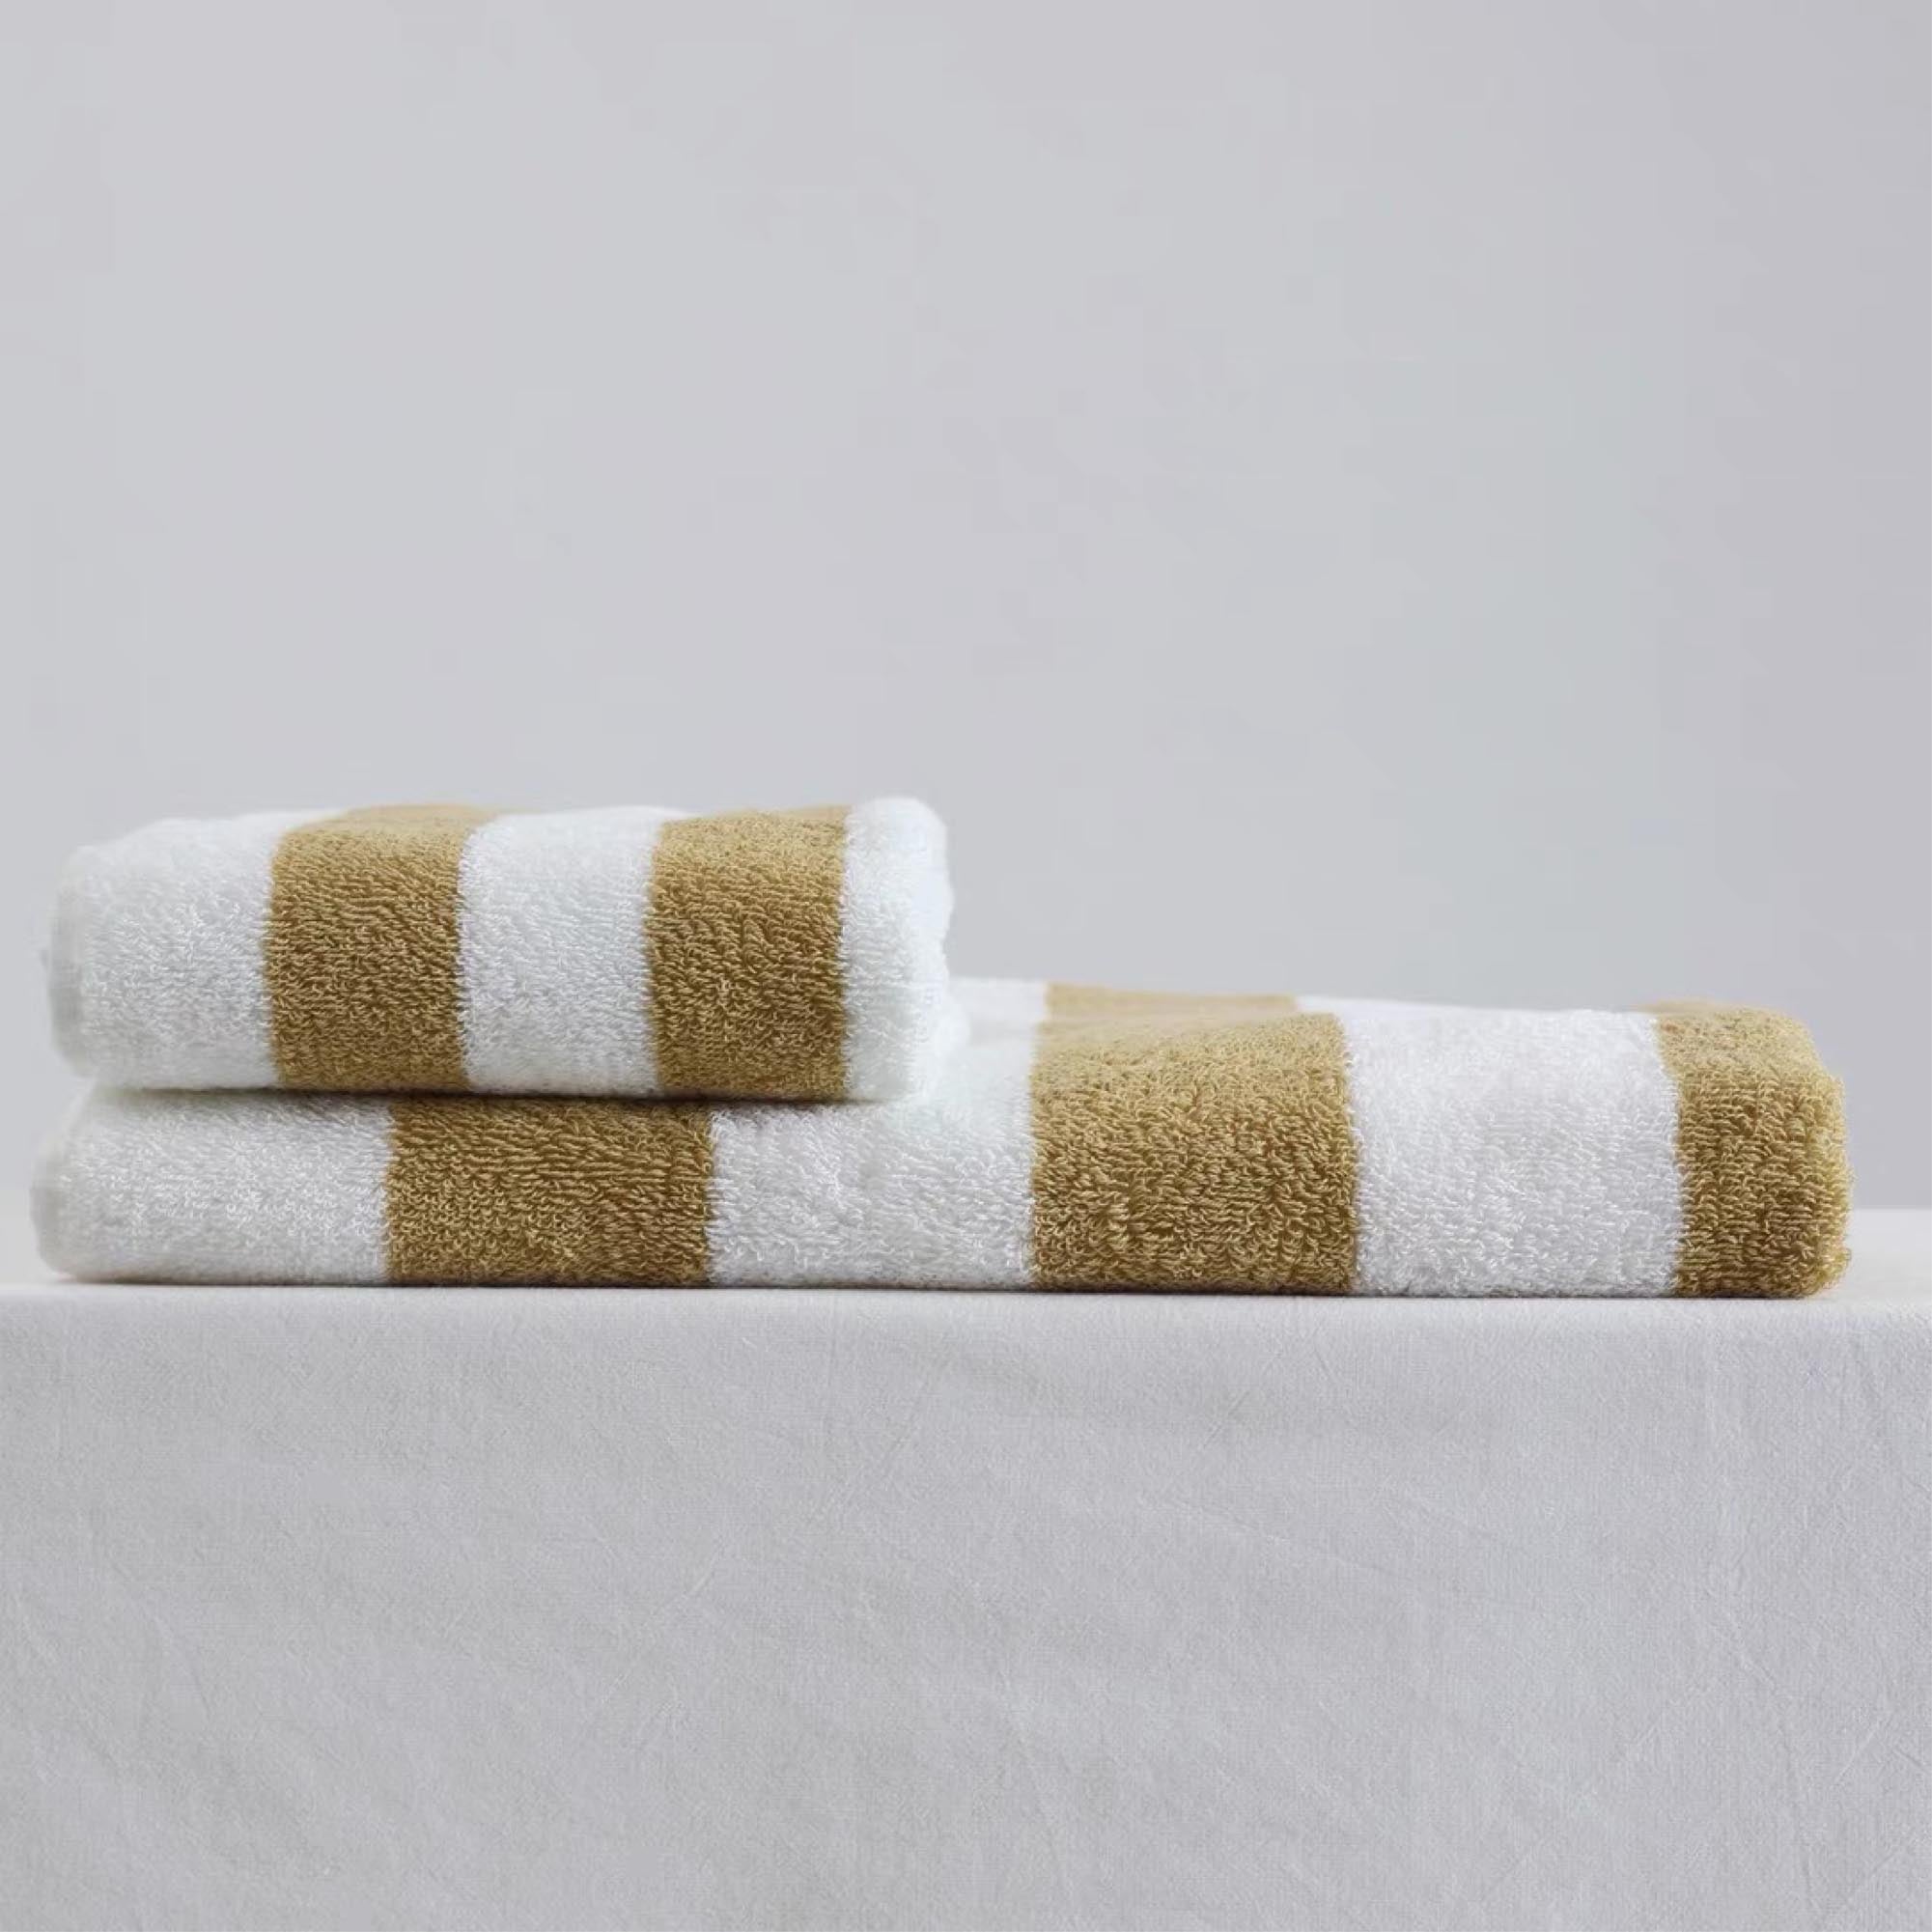 White and Yellow Striped Towel